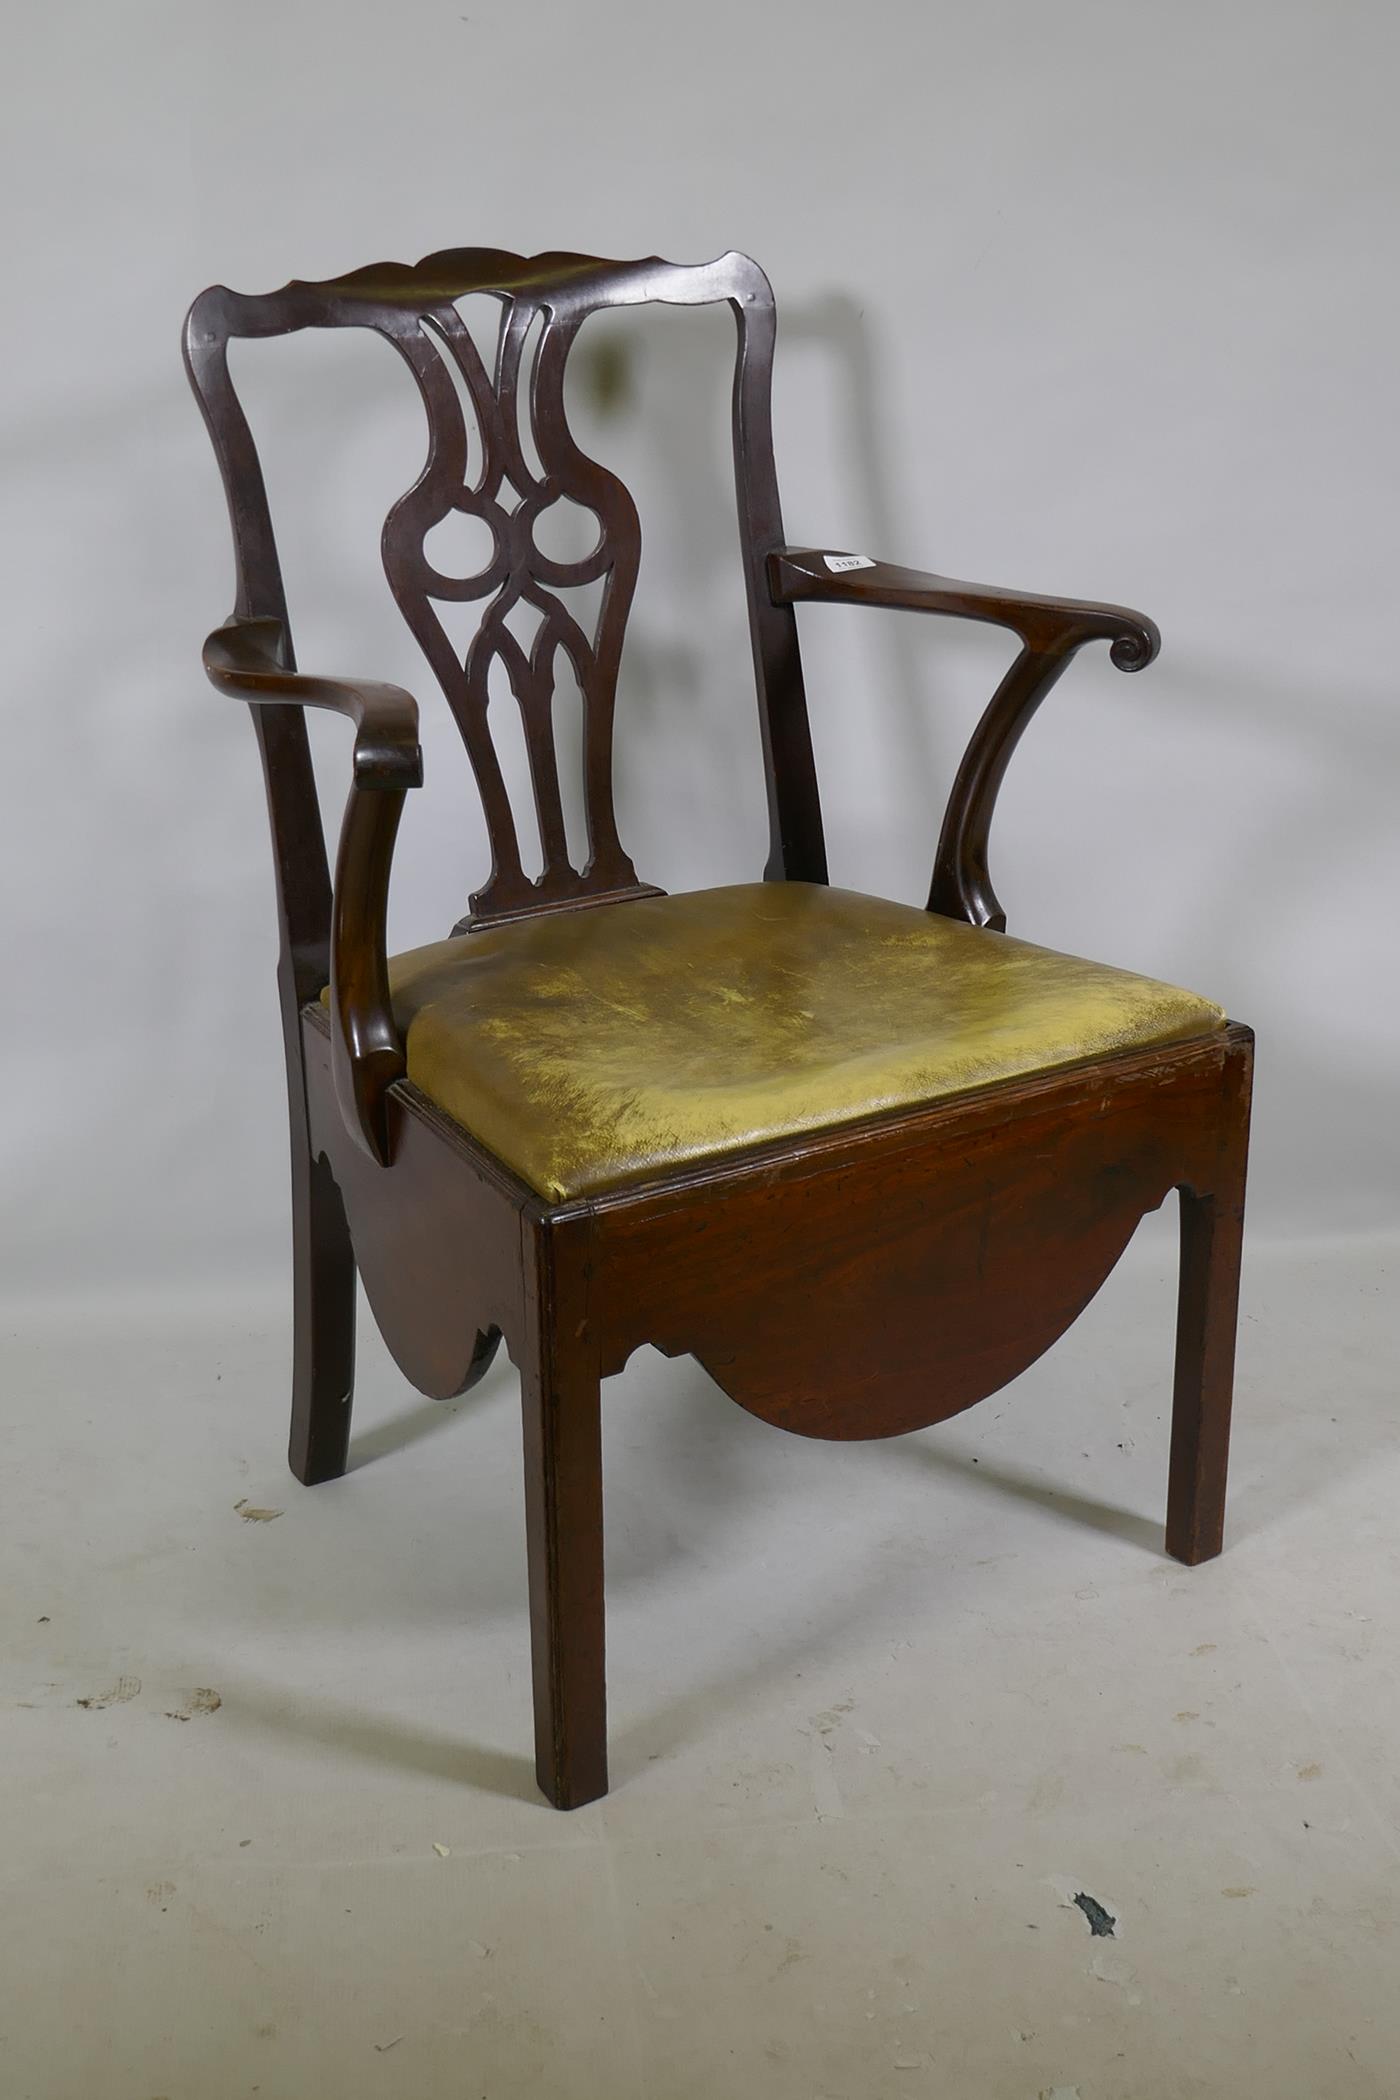 A Georgian mahogany Chippendale style elbow chair with pierced splat back, scroll arms and drop in